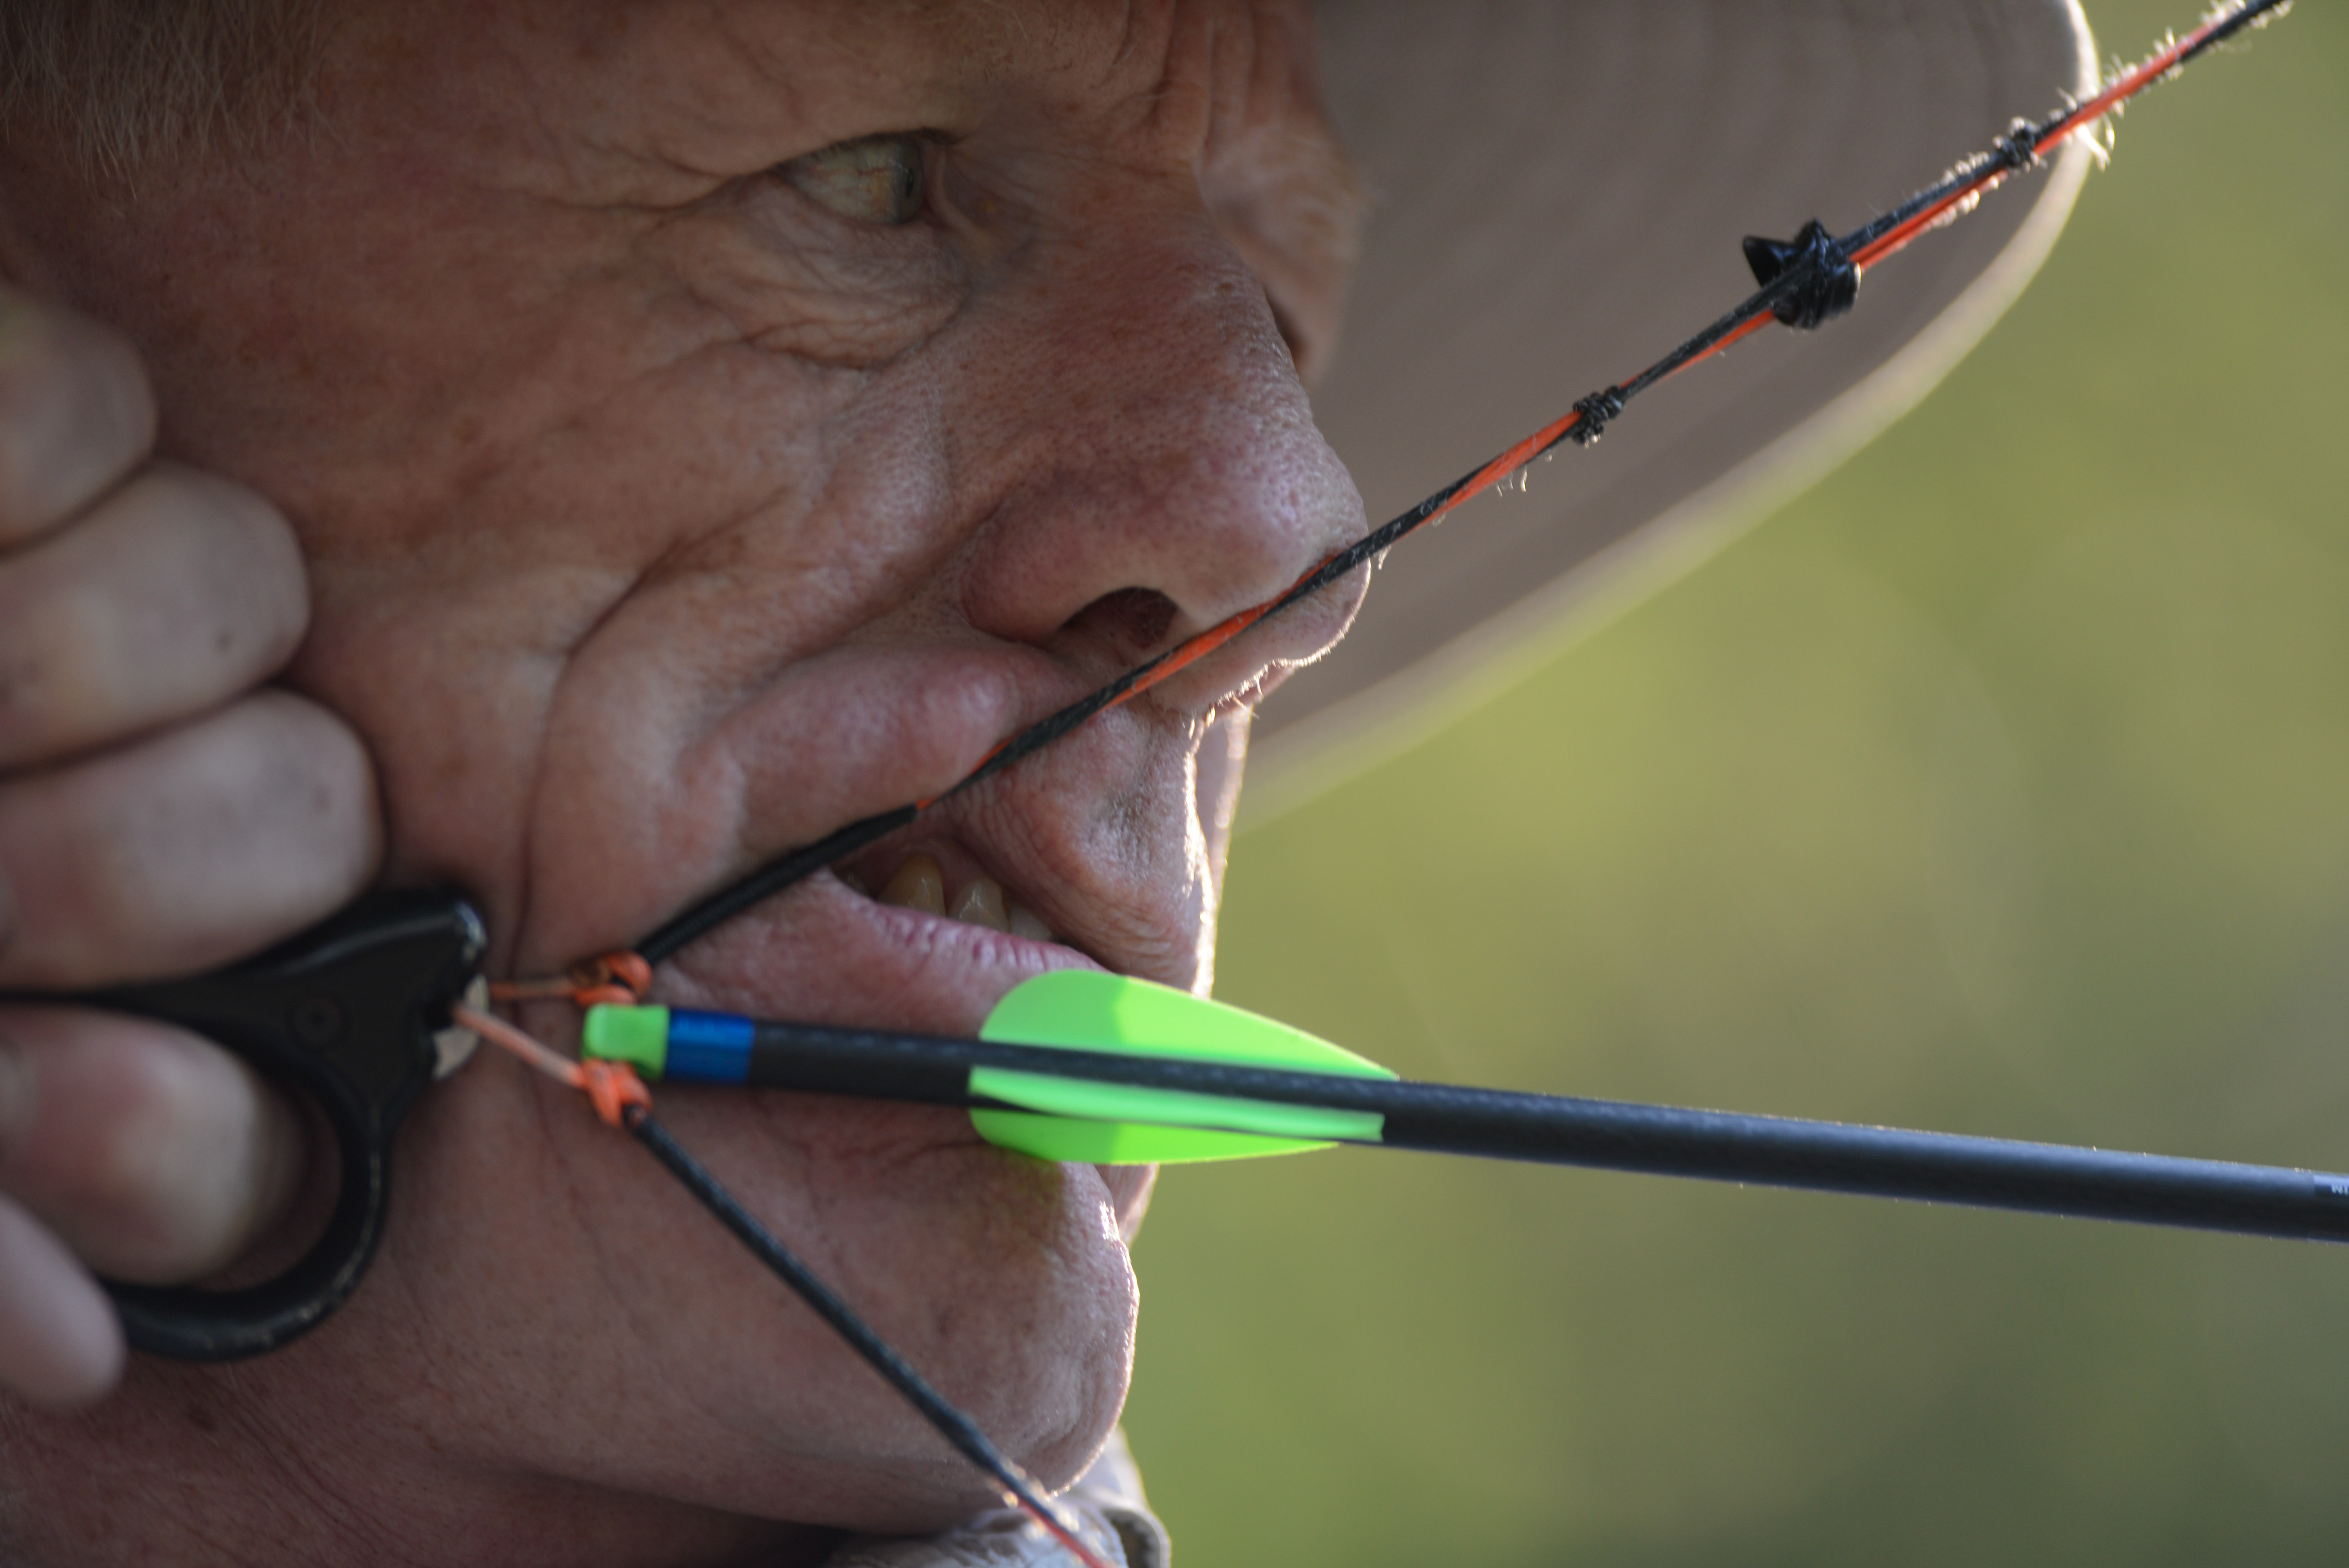 Close up photo of a person taking aim as they draw back an arrow.